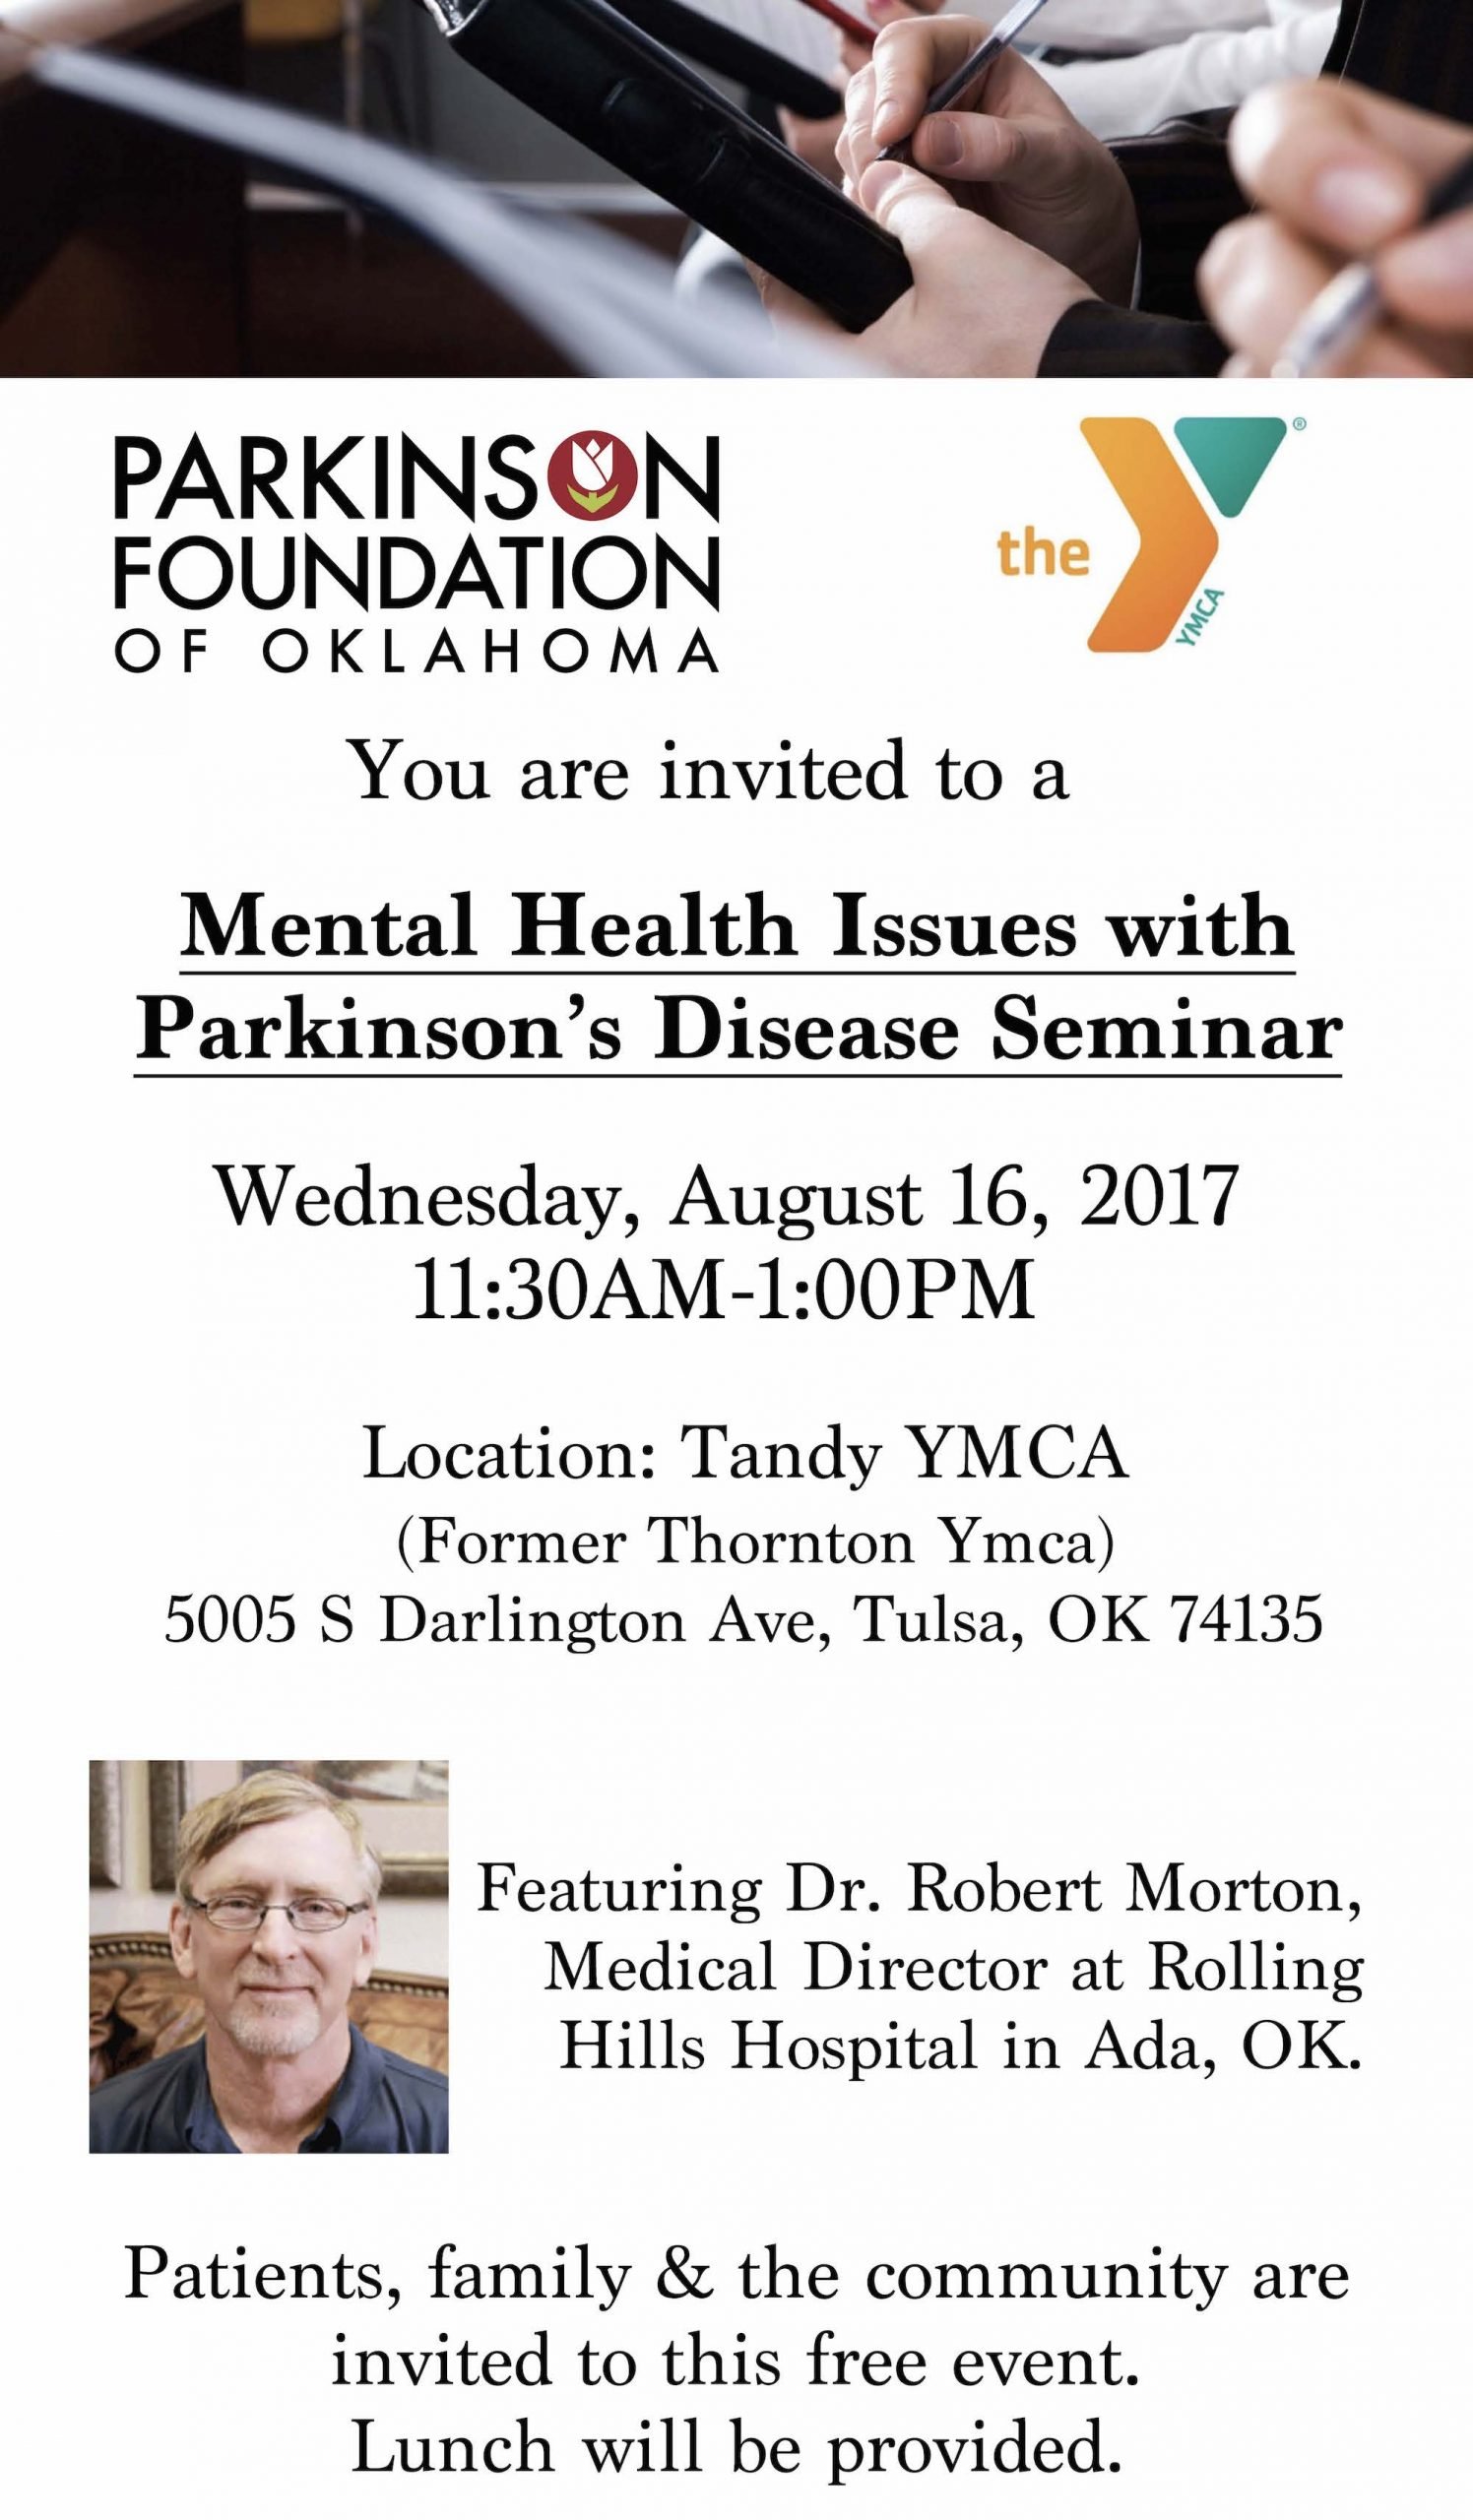 Mental Health Issues and Parkinson